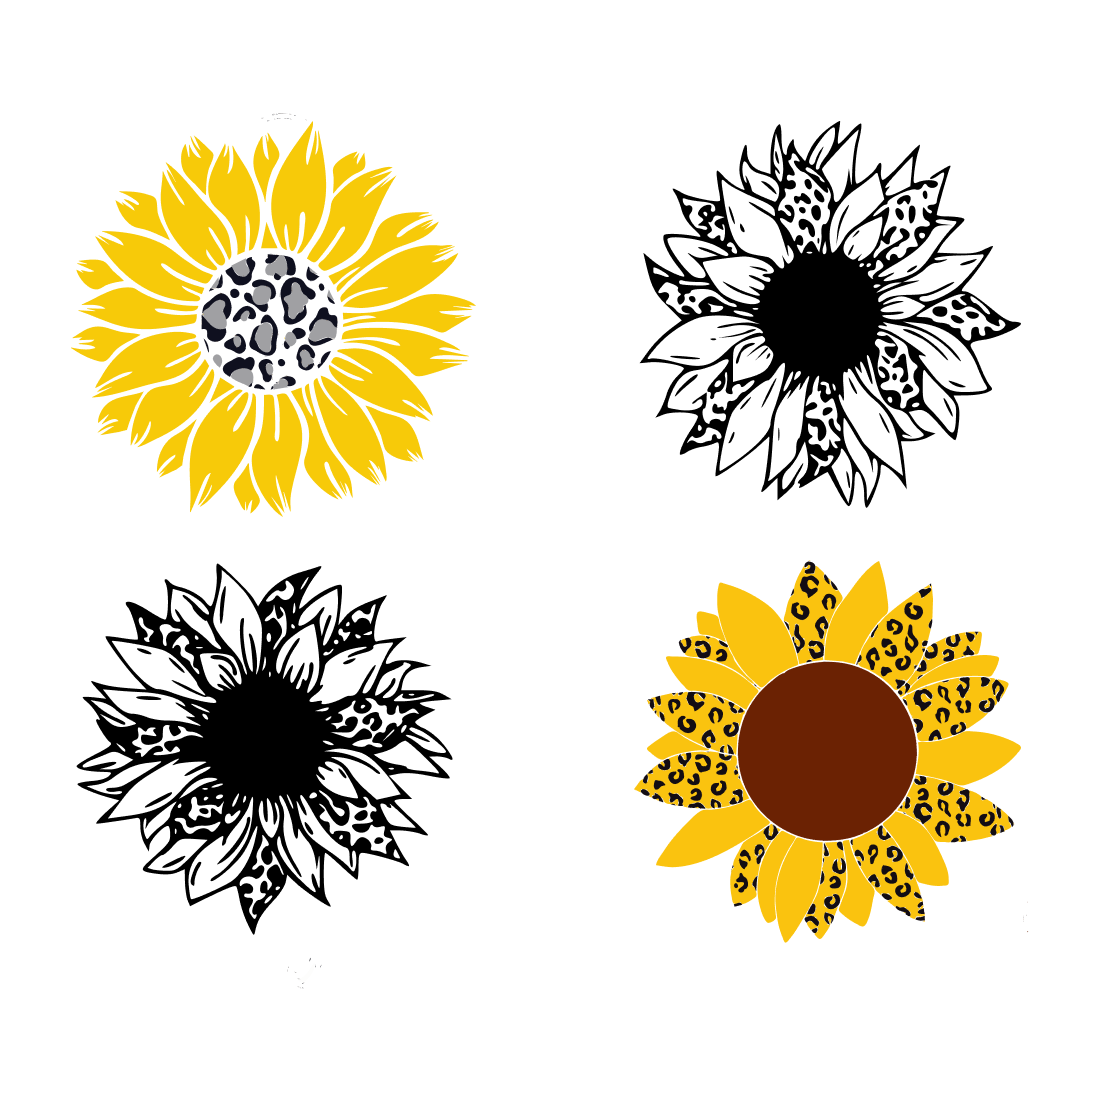 Four sunflowers are shown in four different colors.